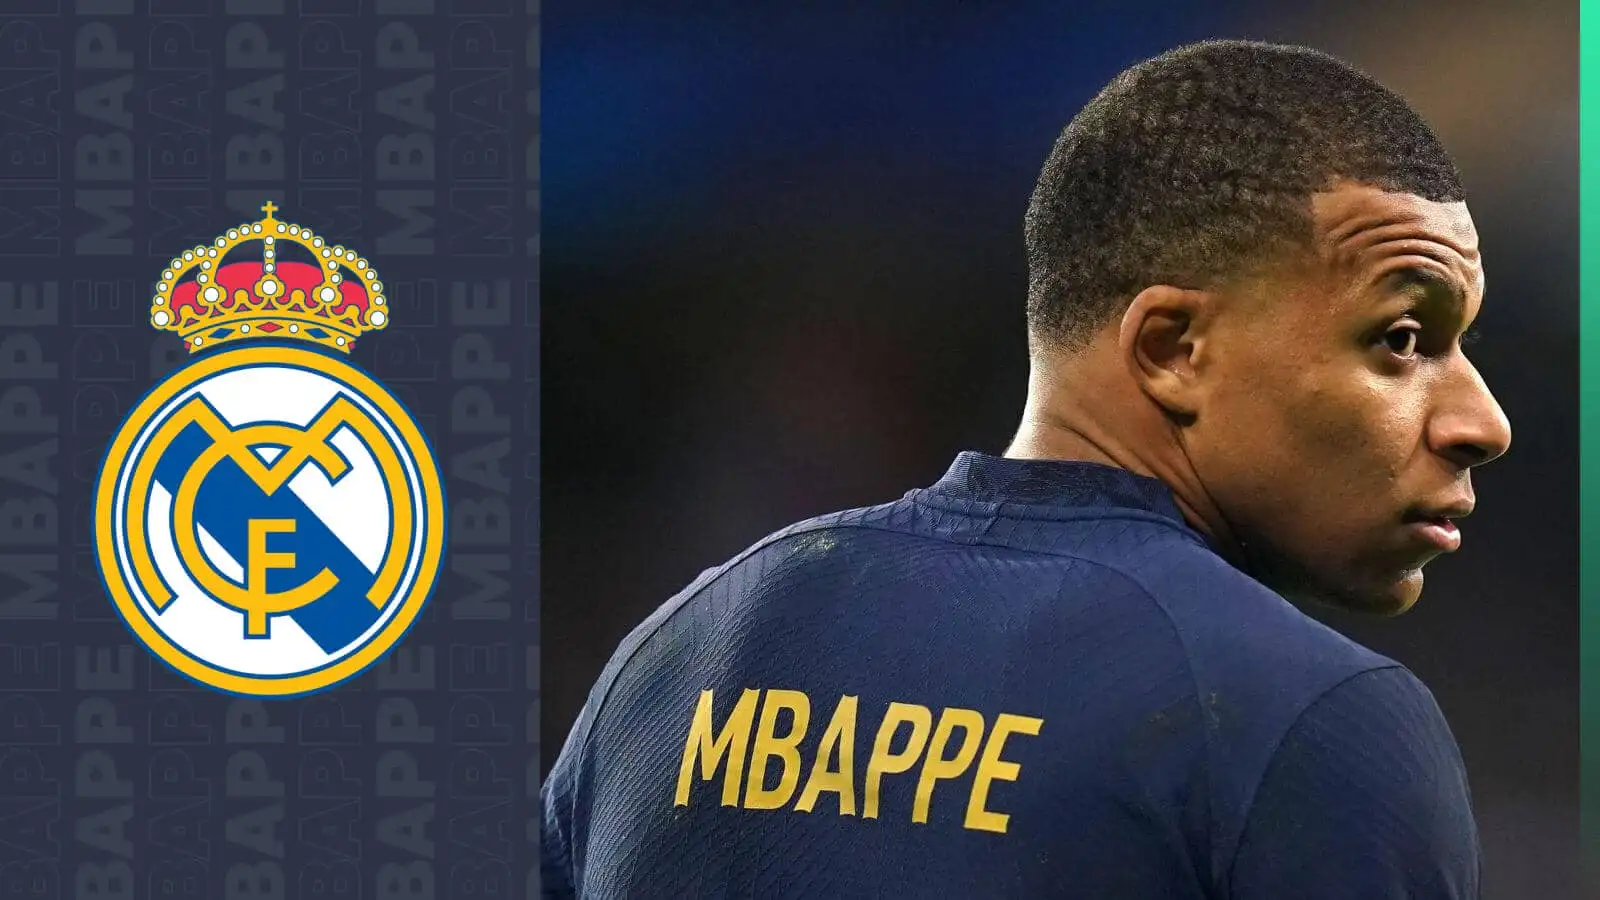 Kylian Mbappe next to the Real Madrid badge